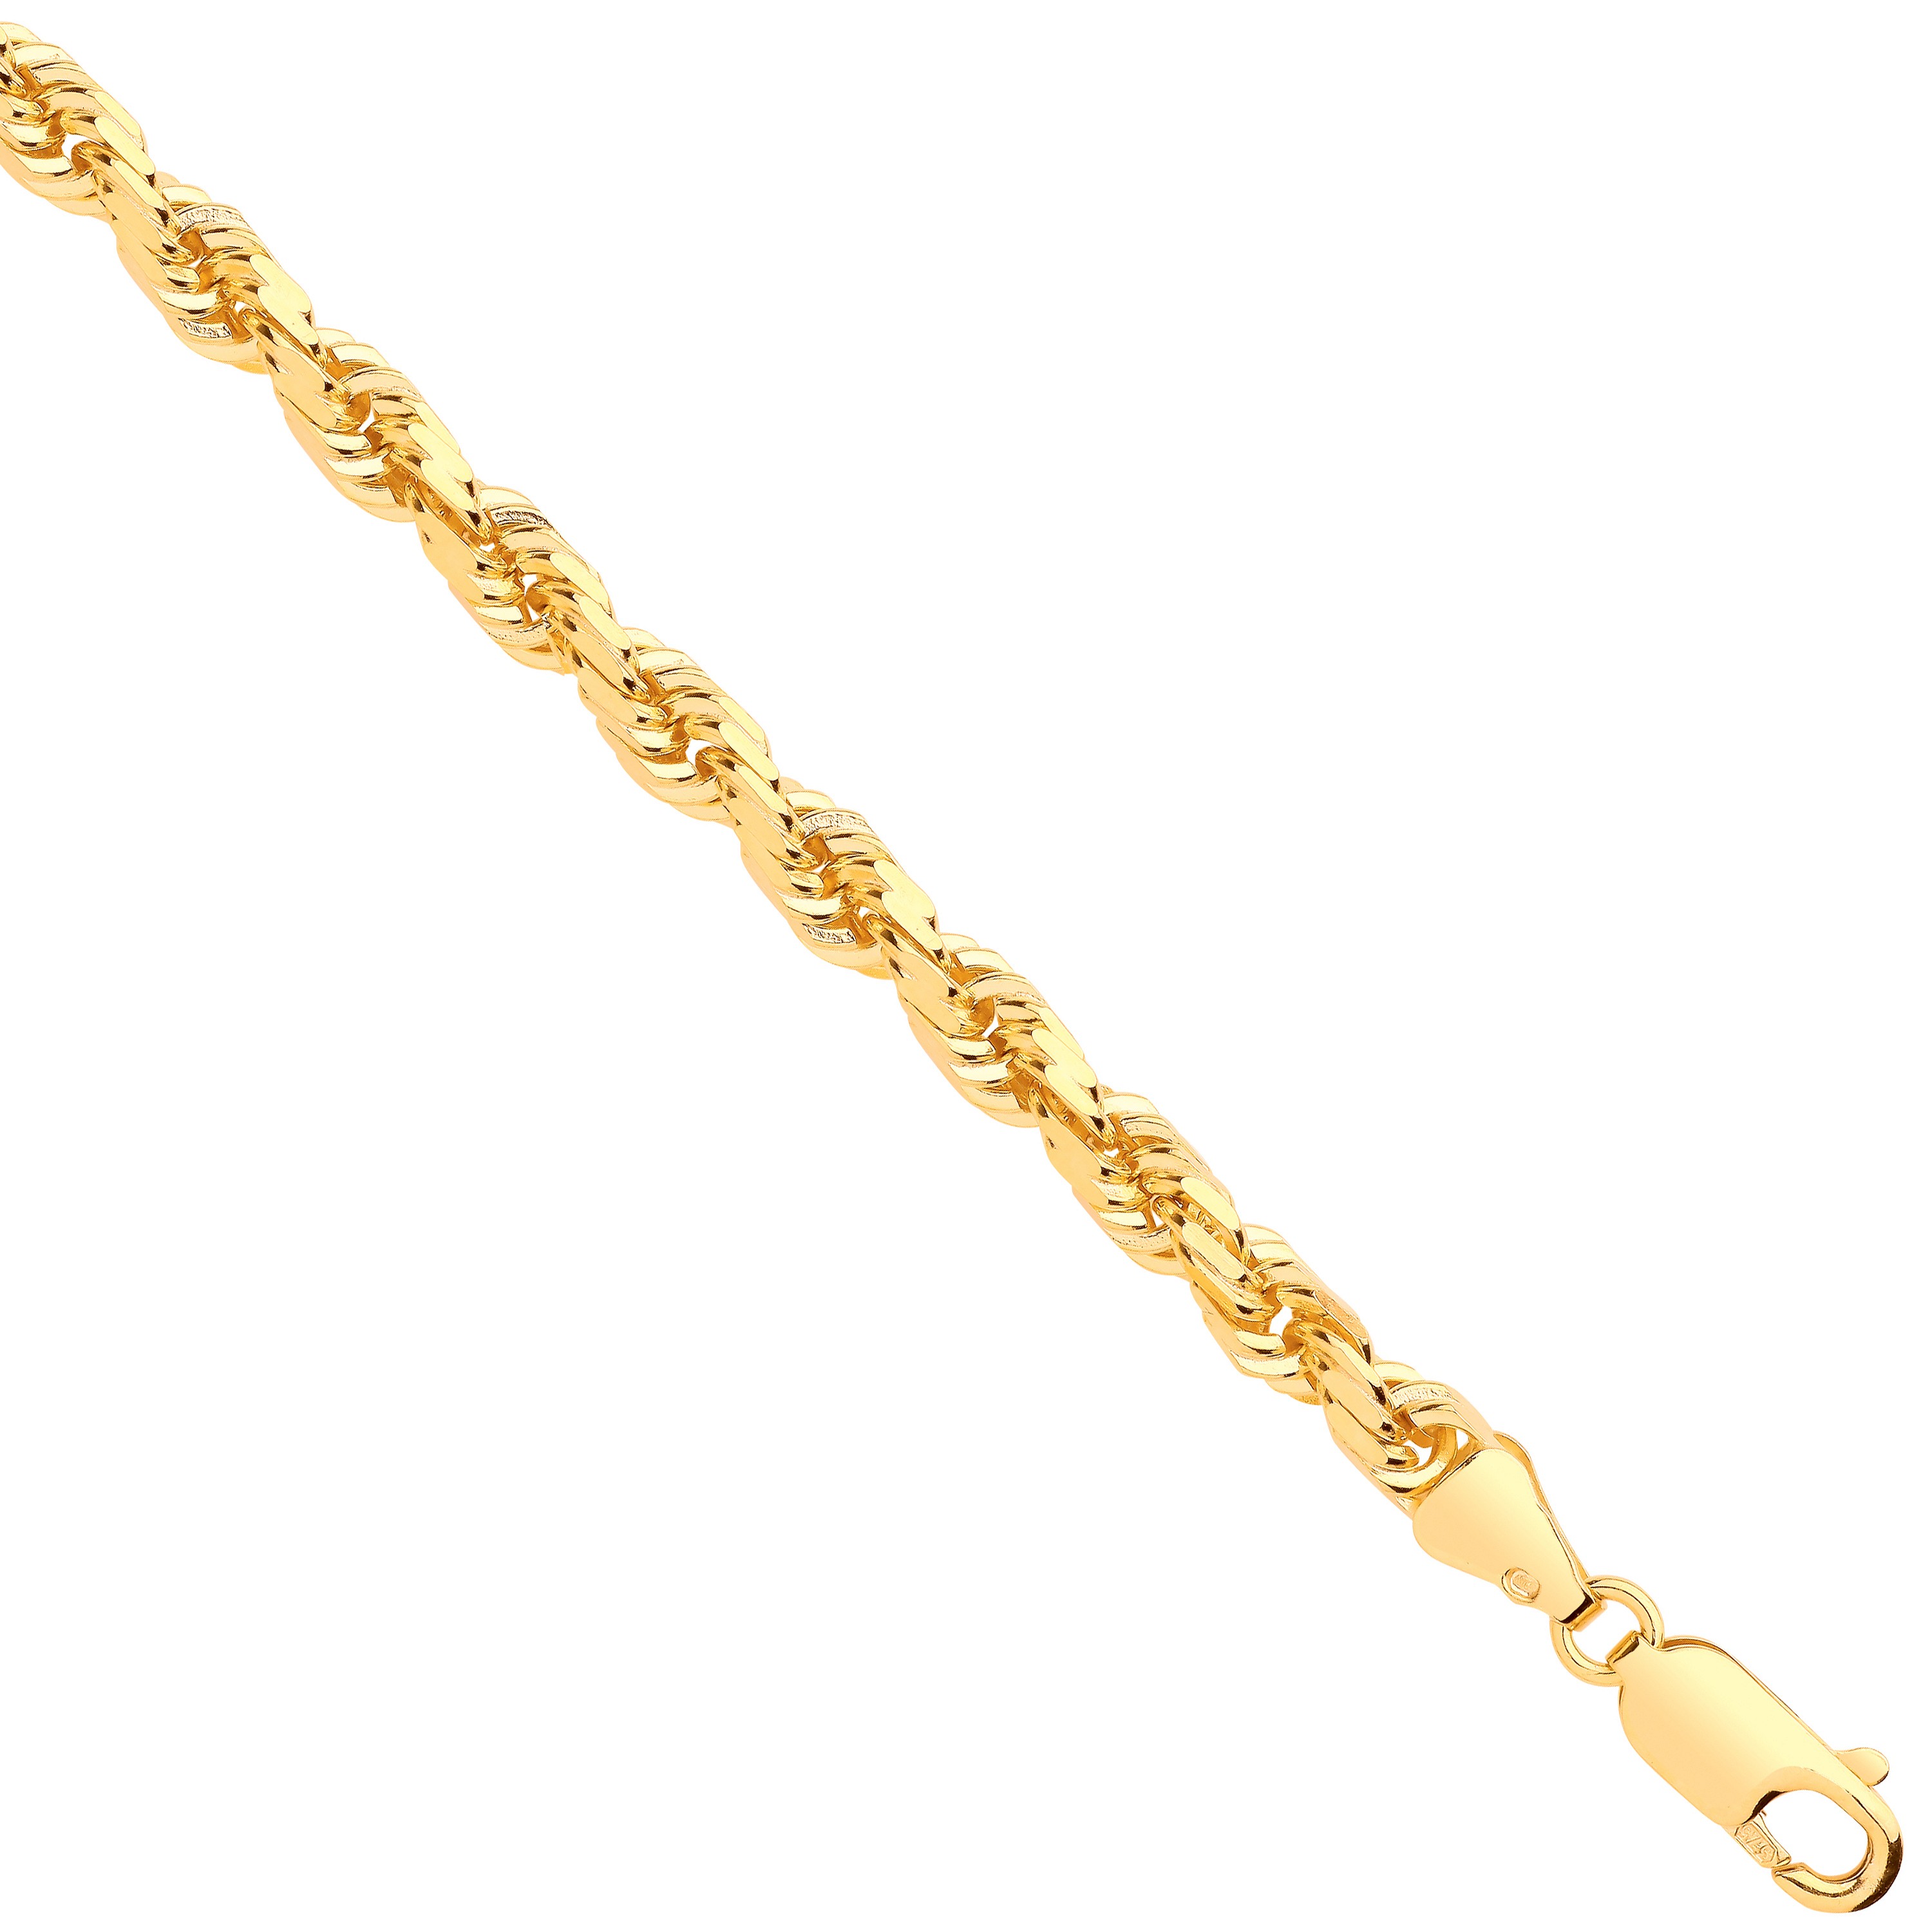 Y/G D/C 4.2mm Solid Rope Chain